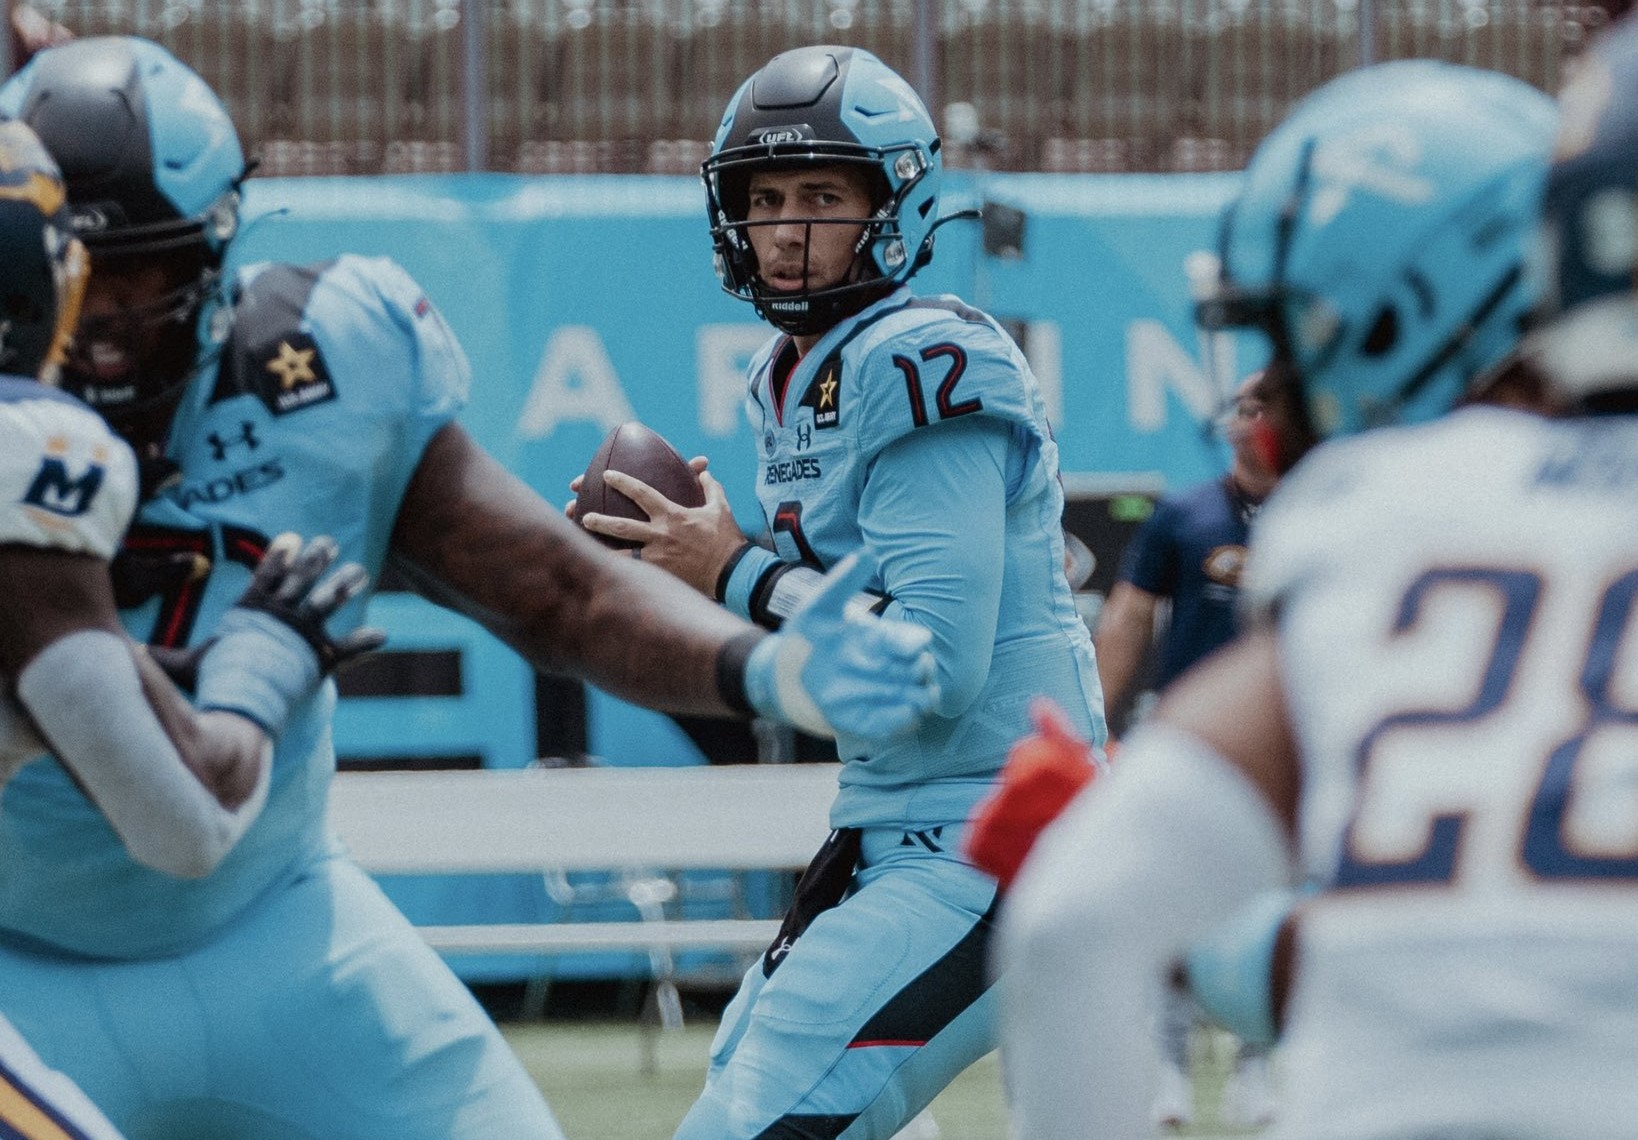 Arlington Renegades quarterback Luis Perez prepares to throw a pass in a Week 7 UFL game against the Memphis Showboats.(<a href="https://x.com/XFLRenegades/status/1789746512156635338" target="_blank" rel="noopener">@XFLRenegades</a>)